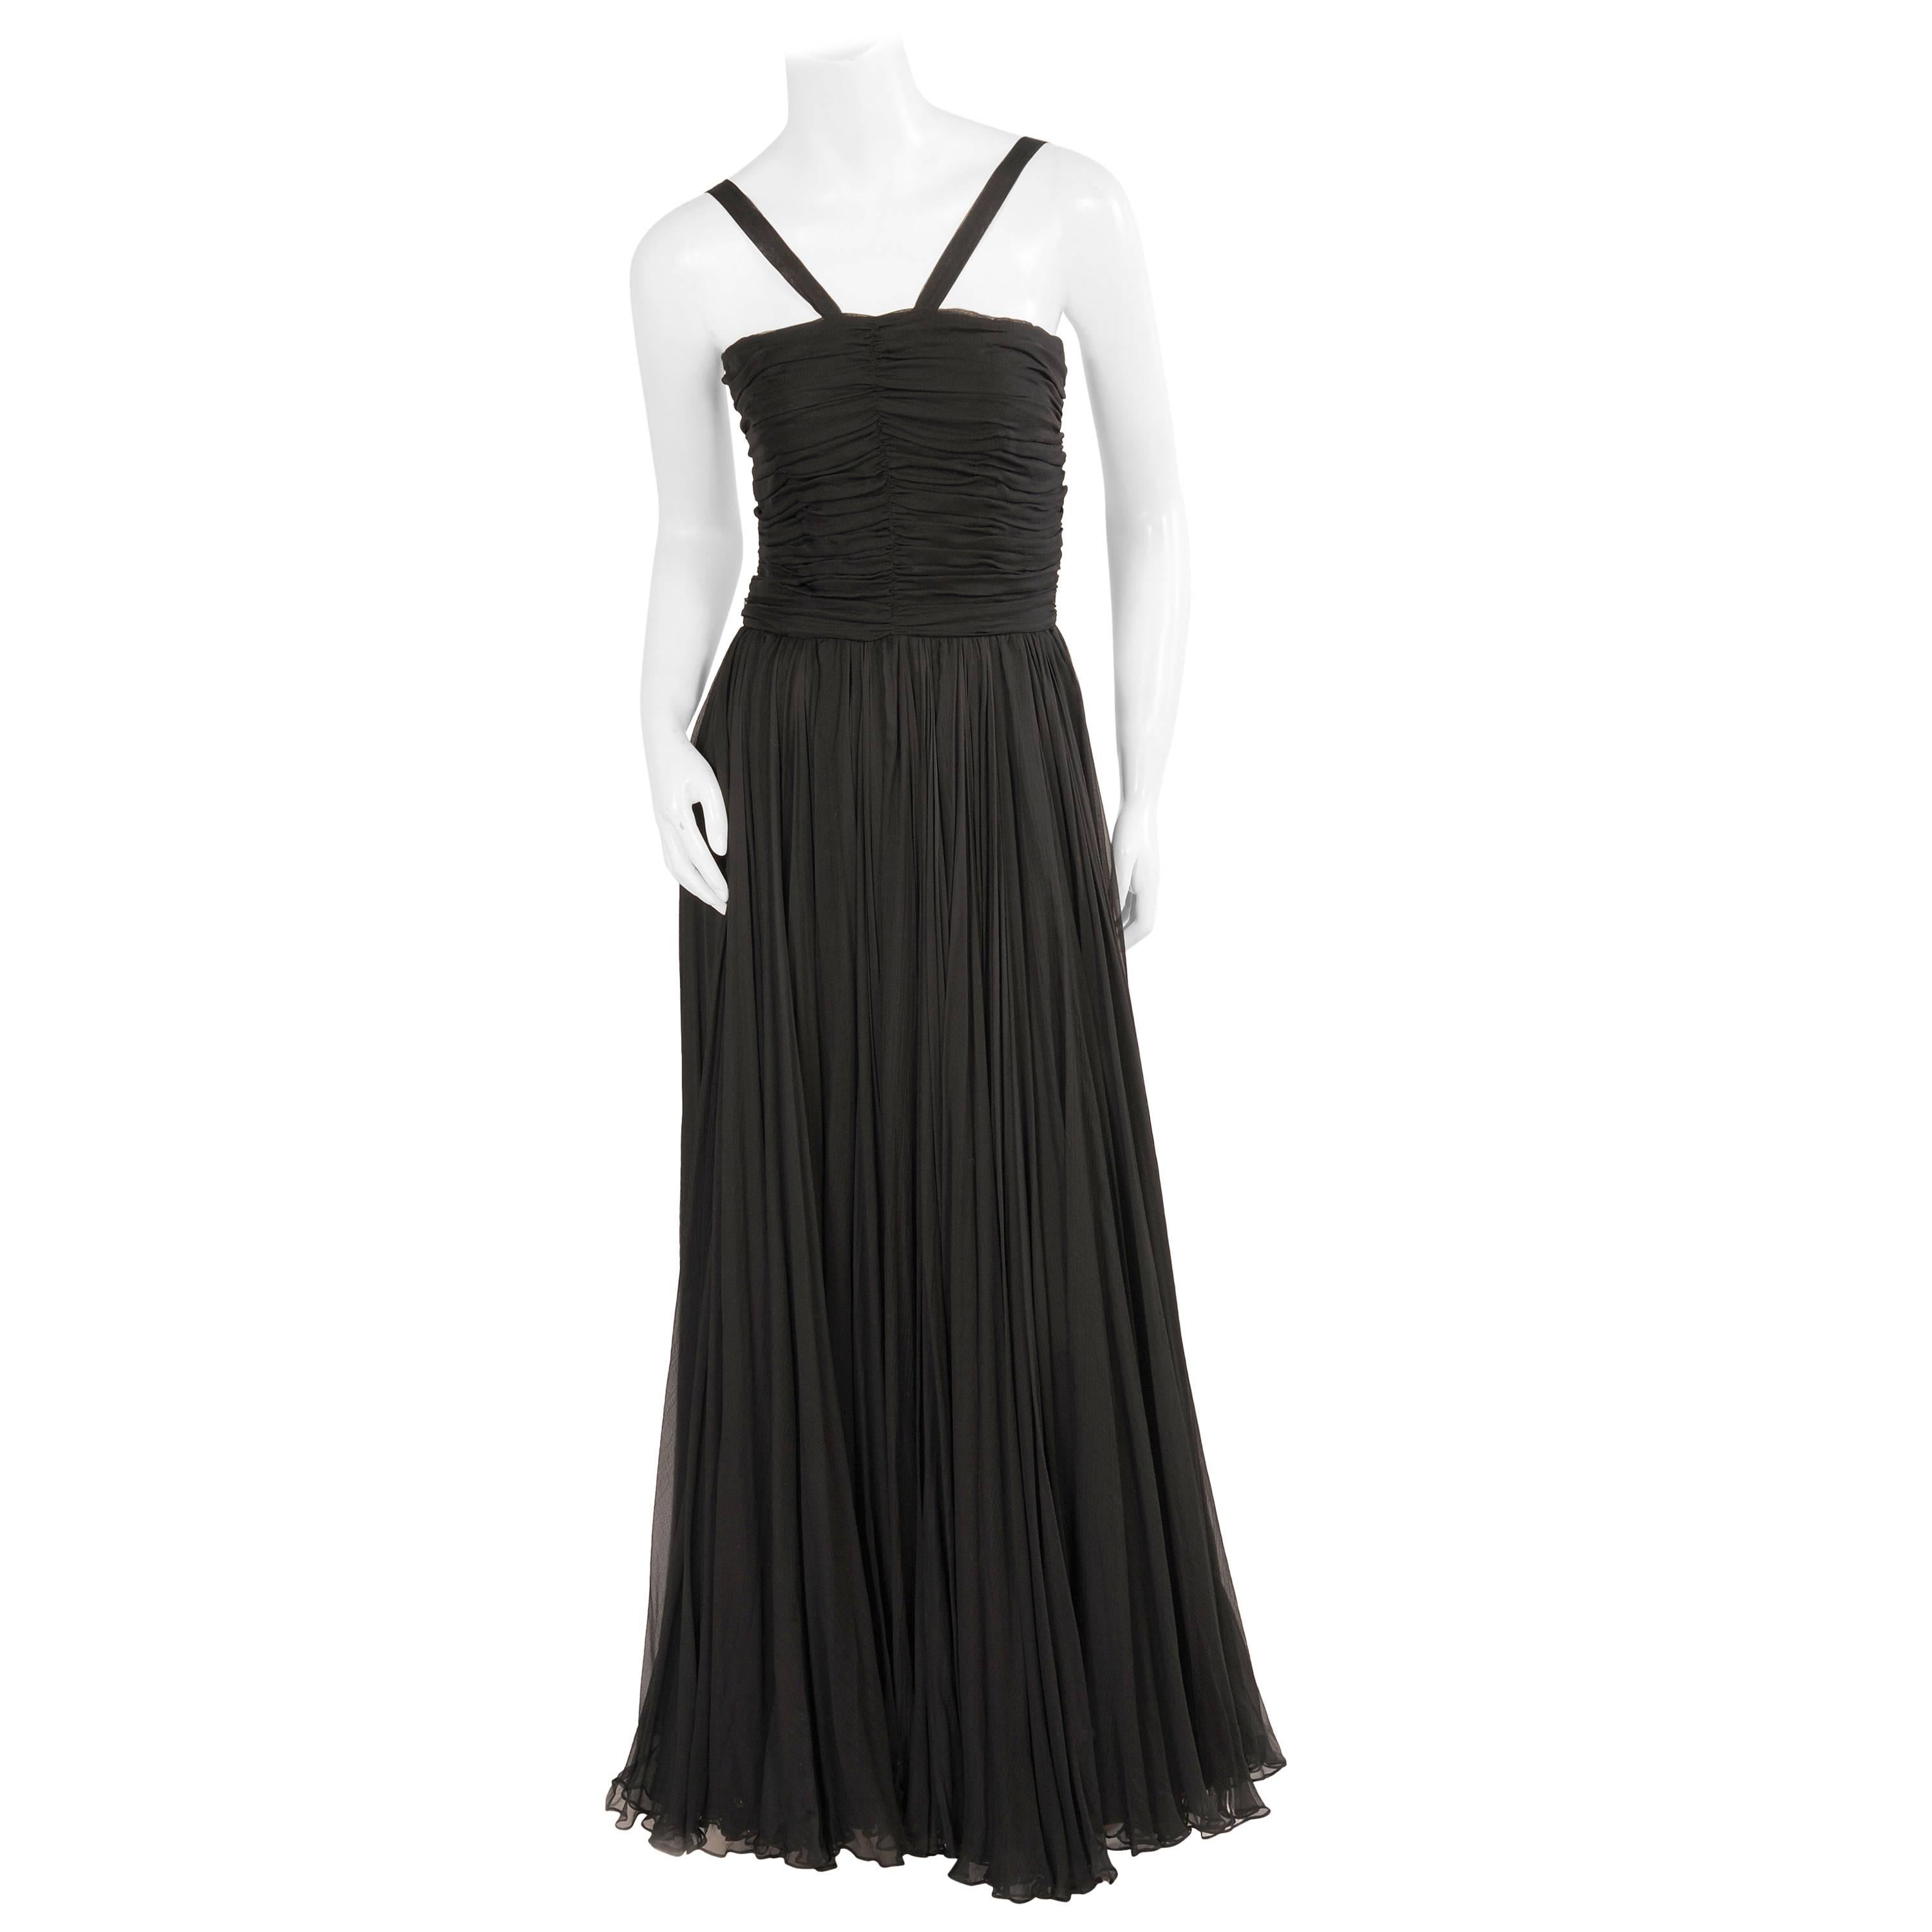 Ben Reig Black Silk Chiffon Evening Gown in the style of Desses, 1950s 